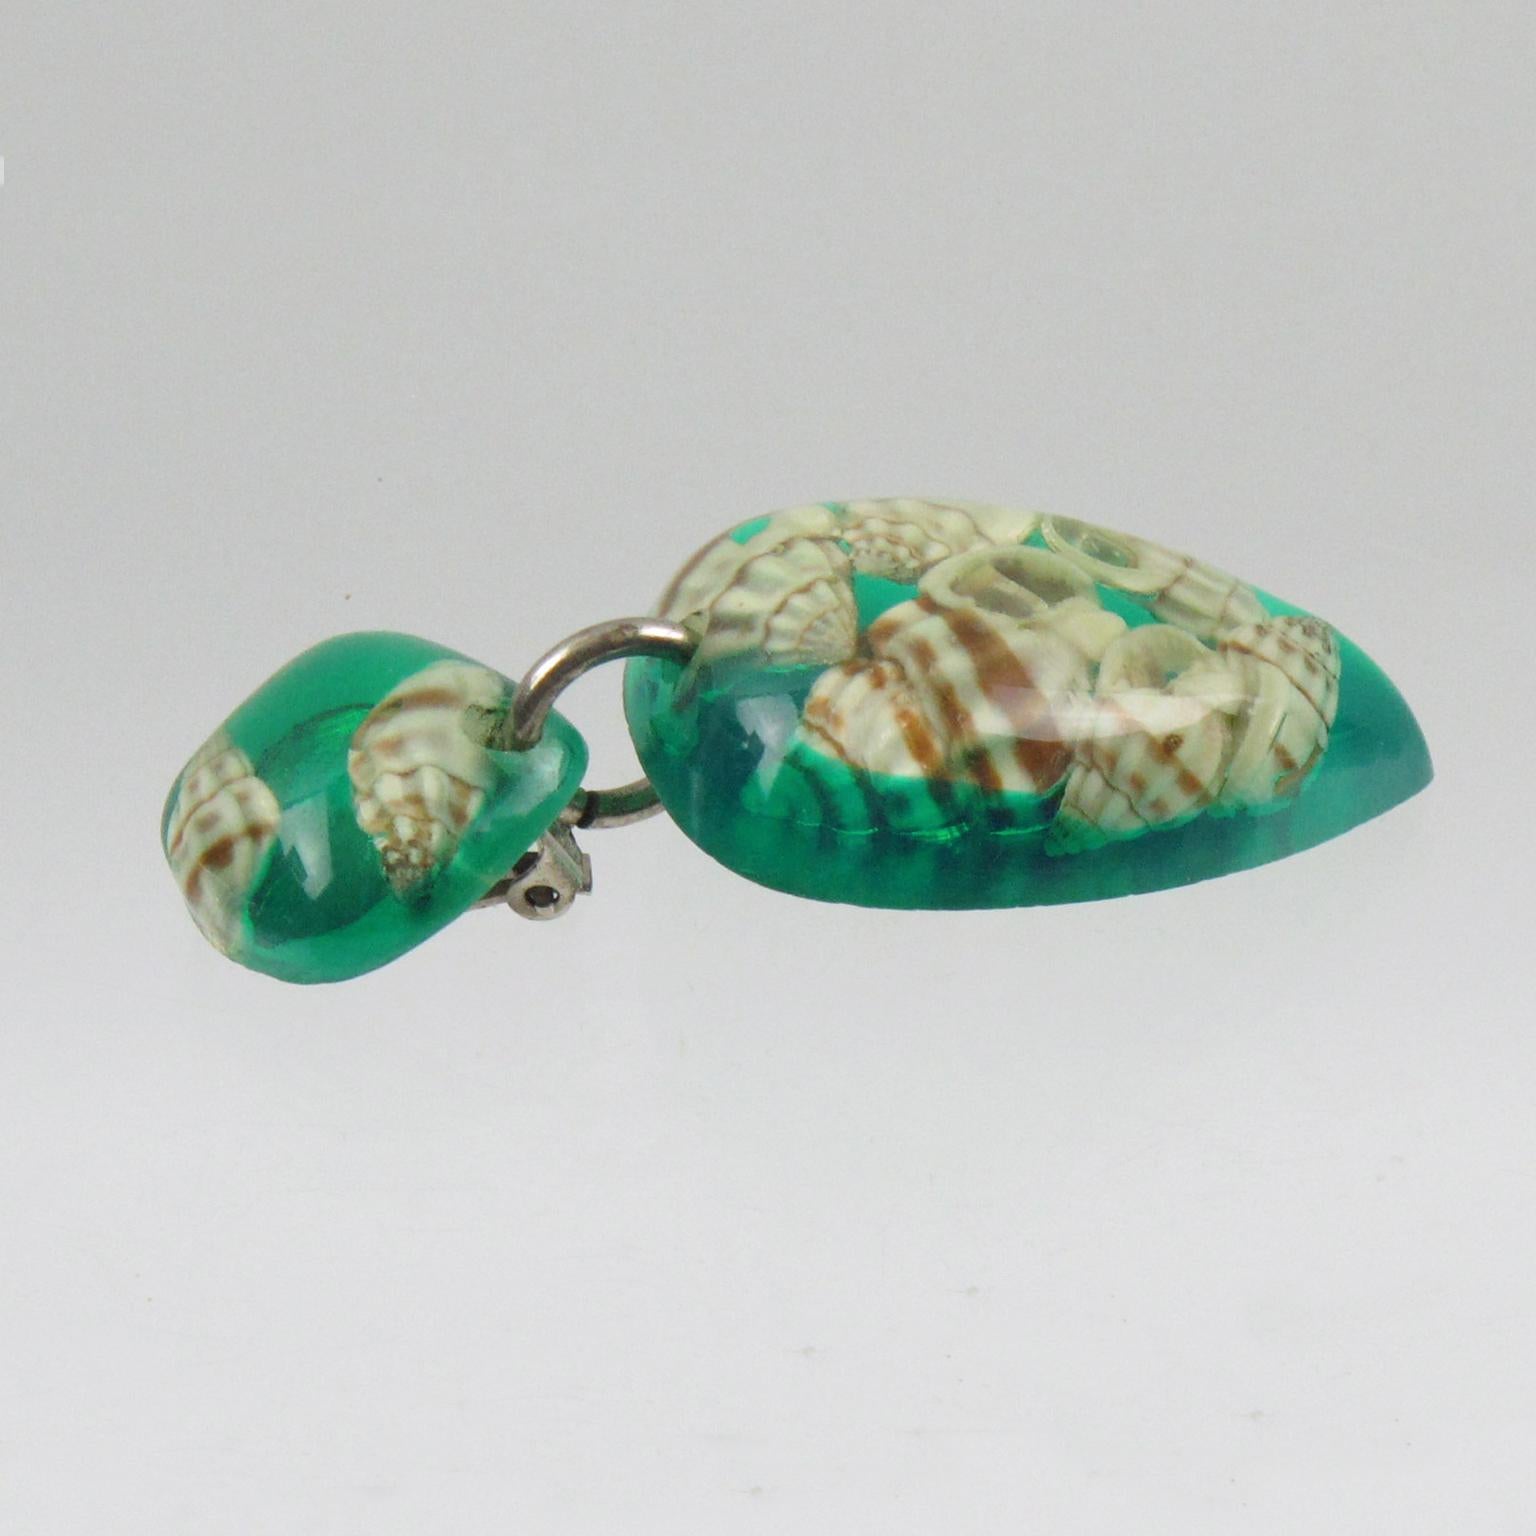 French Oversized Green Lucite Clip on Earrings with SeaShell Inclusions 1